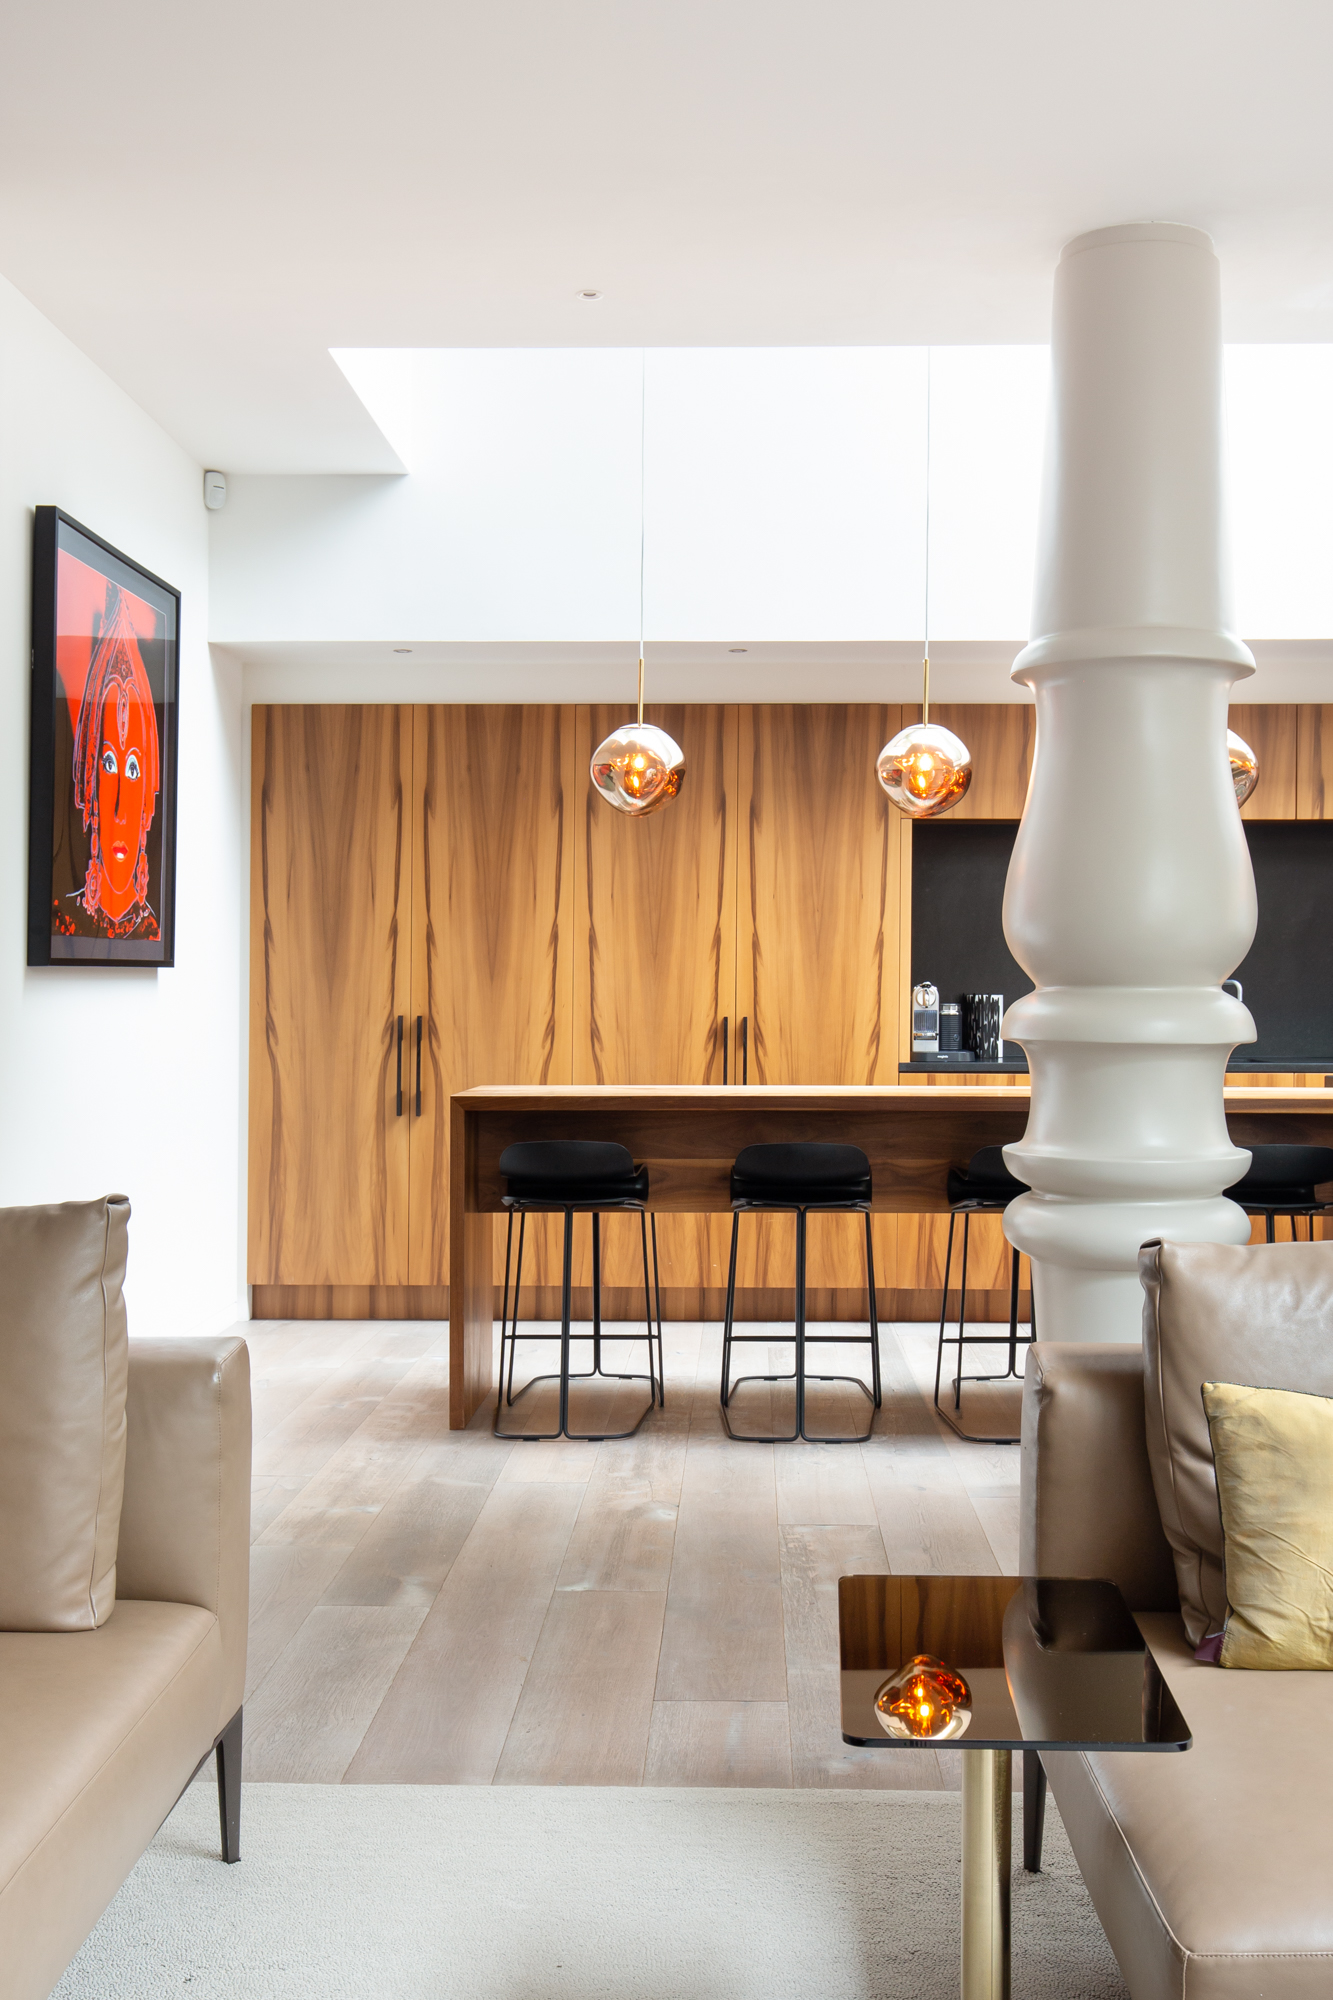 Kitchen in Westbourne Grove with oversized column and Tom Dixon chandeliers